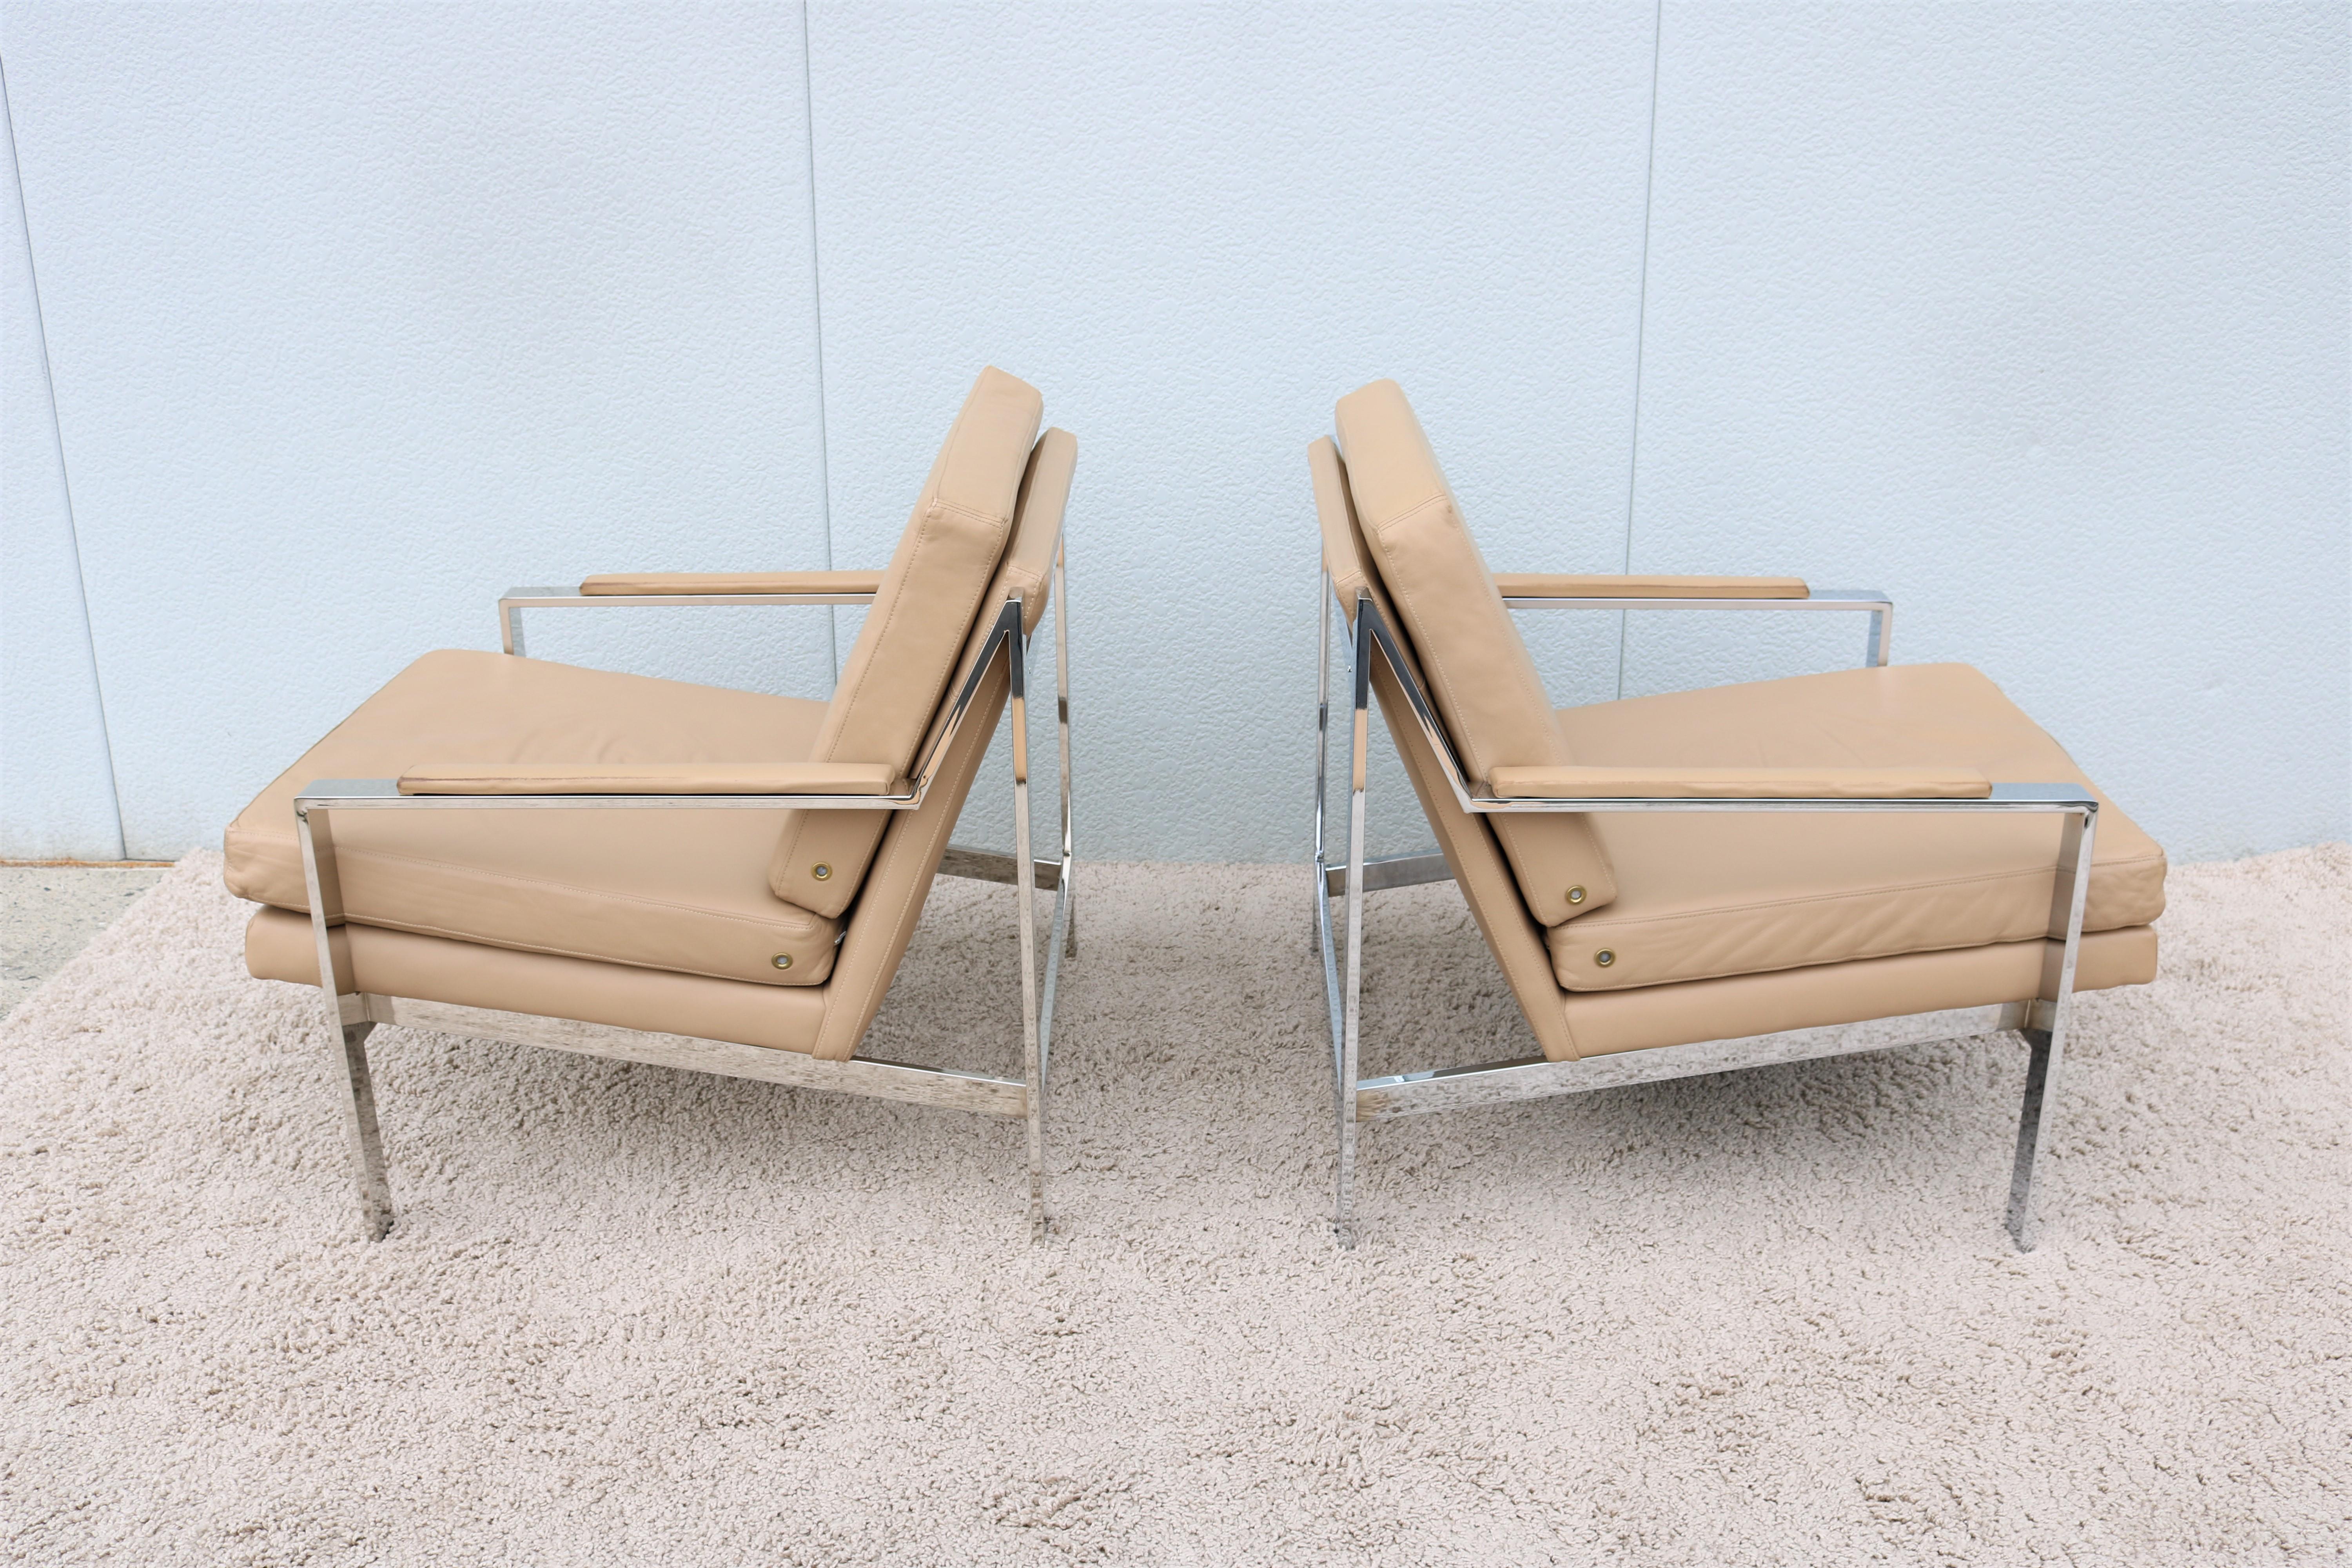 Vintage Cy Mann Leather and Chrome Lounge Chairs in Milo Baughman Style, a Pair For Sale 1